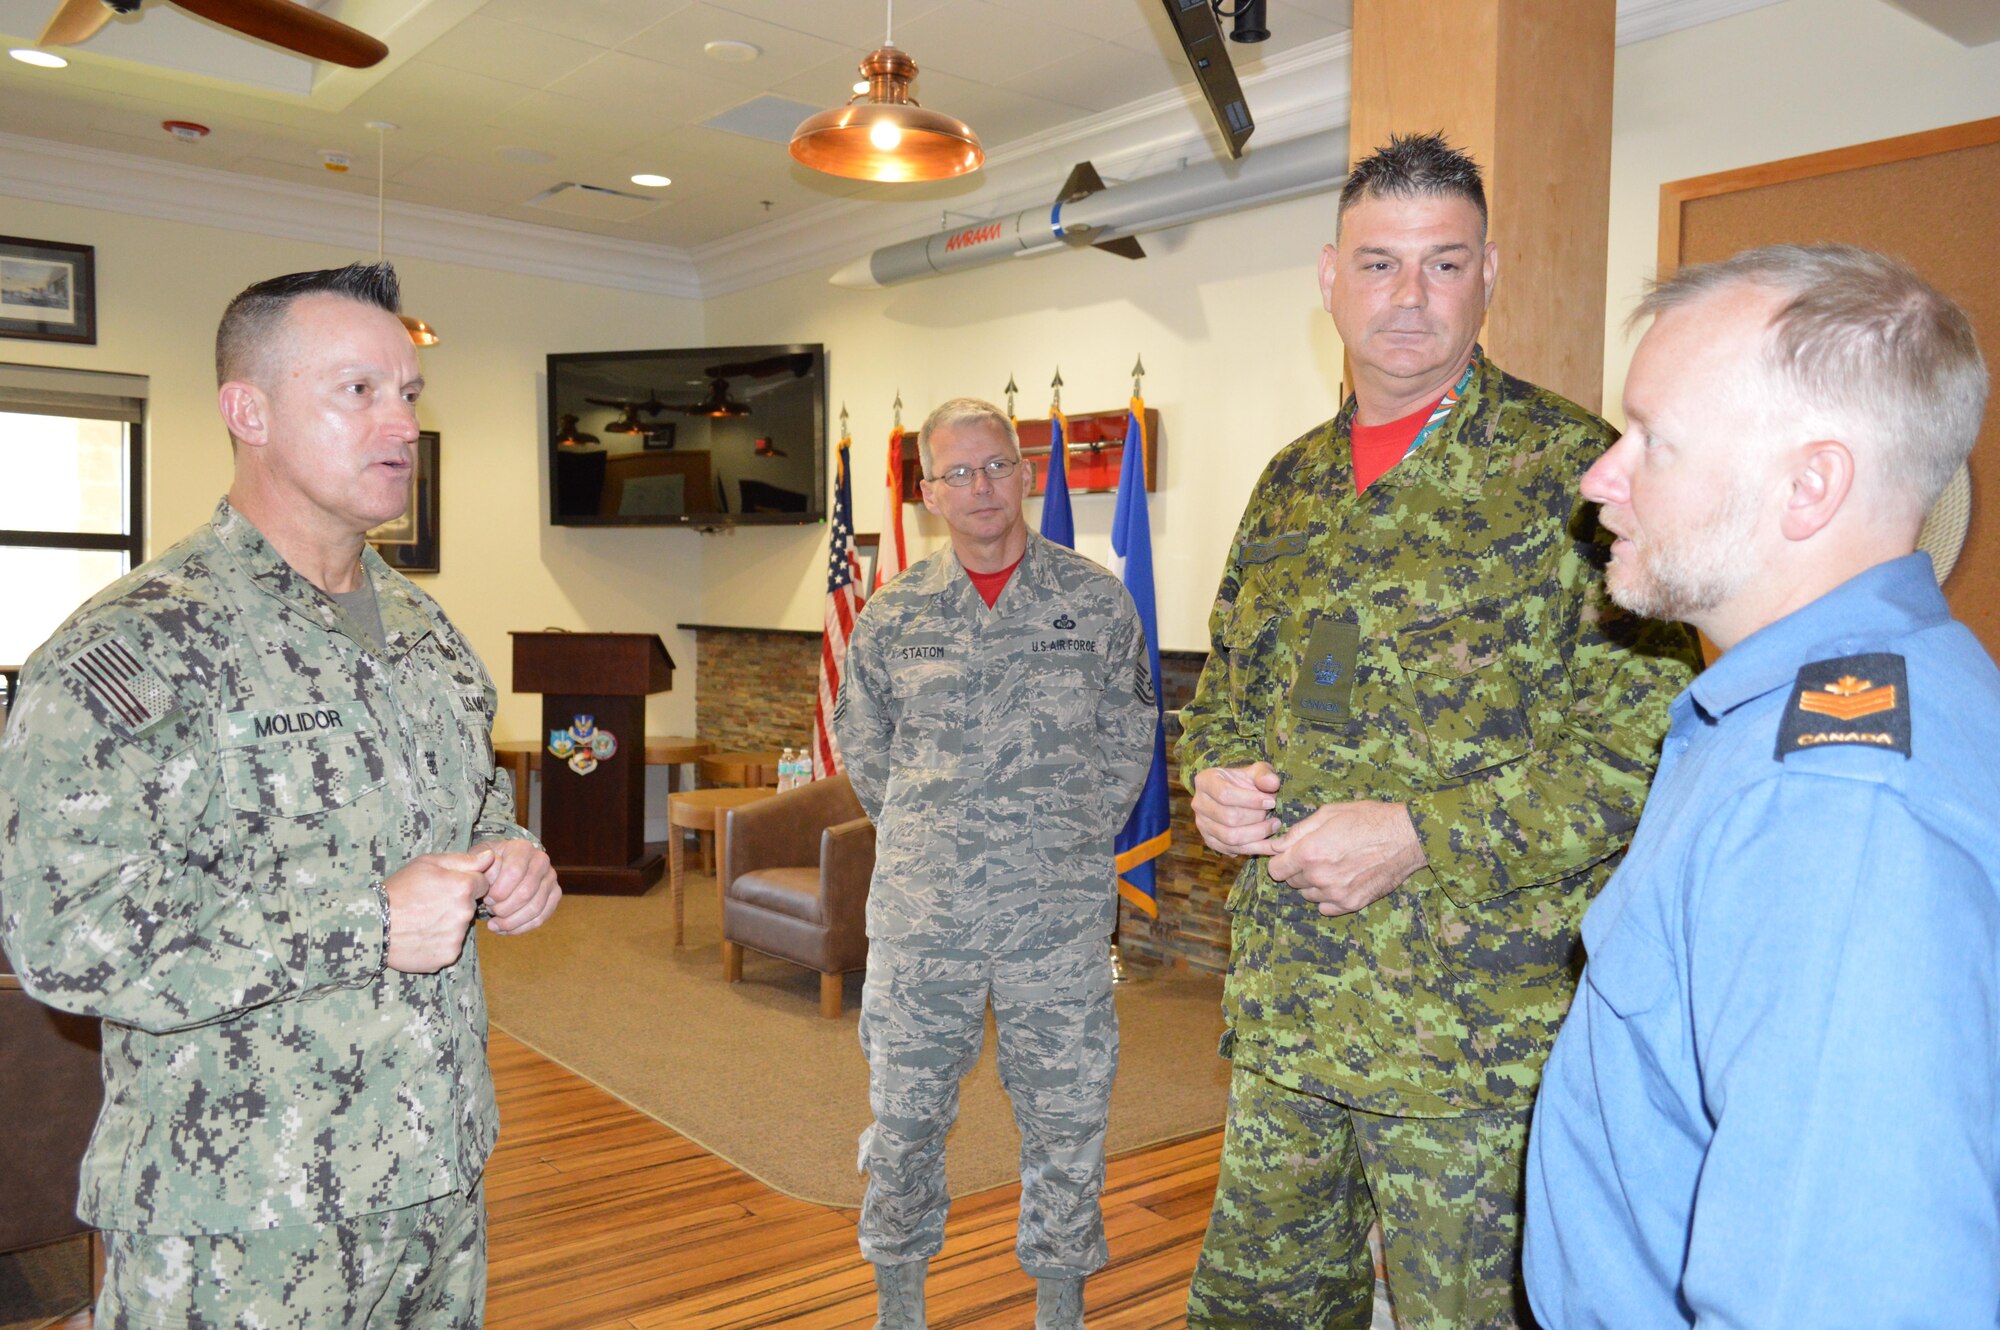 Navy Fleet Master Chief Terrence Molidor, North American Aerospace Defense Command and United States Command Senior Enlisted Leader, talks with Royal Canadian Navy PO2 Brian Fraser about his experiences here after a May 6 senior enlisted call as Royal Canadian Air Force WO Darren Guitard and U.S. Air Force Chief Master Sgt. Billie Statom listen. During his visit, Molidor provided audience members with a current command perspective and answered questions from the audience. (Photo by Mary McHale)